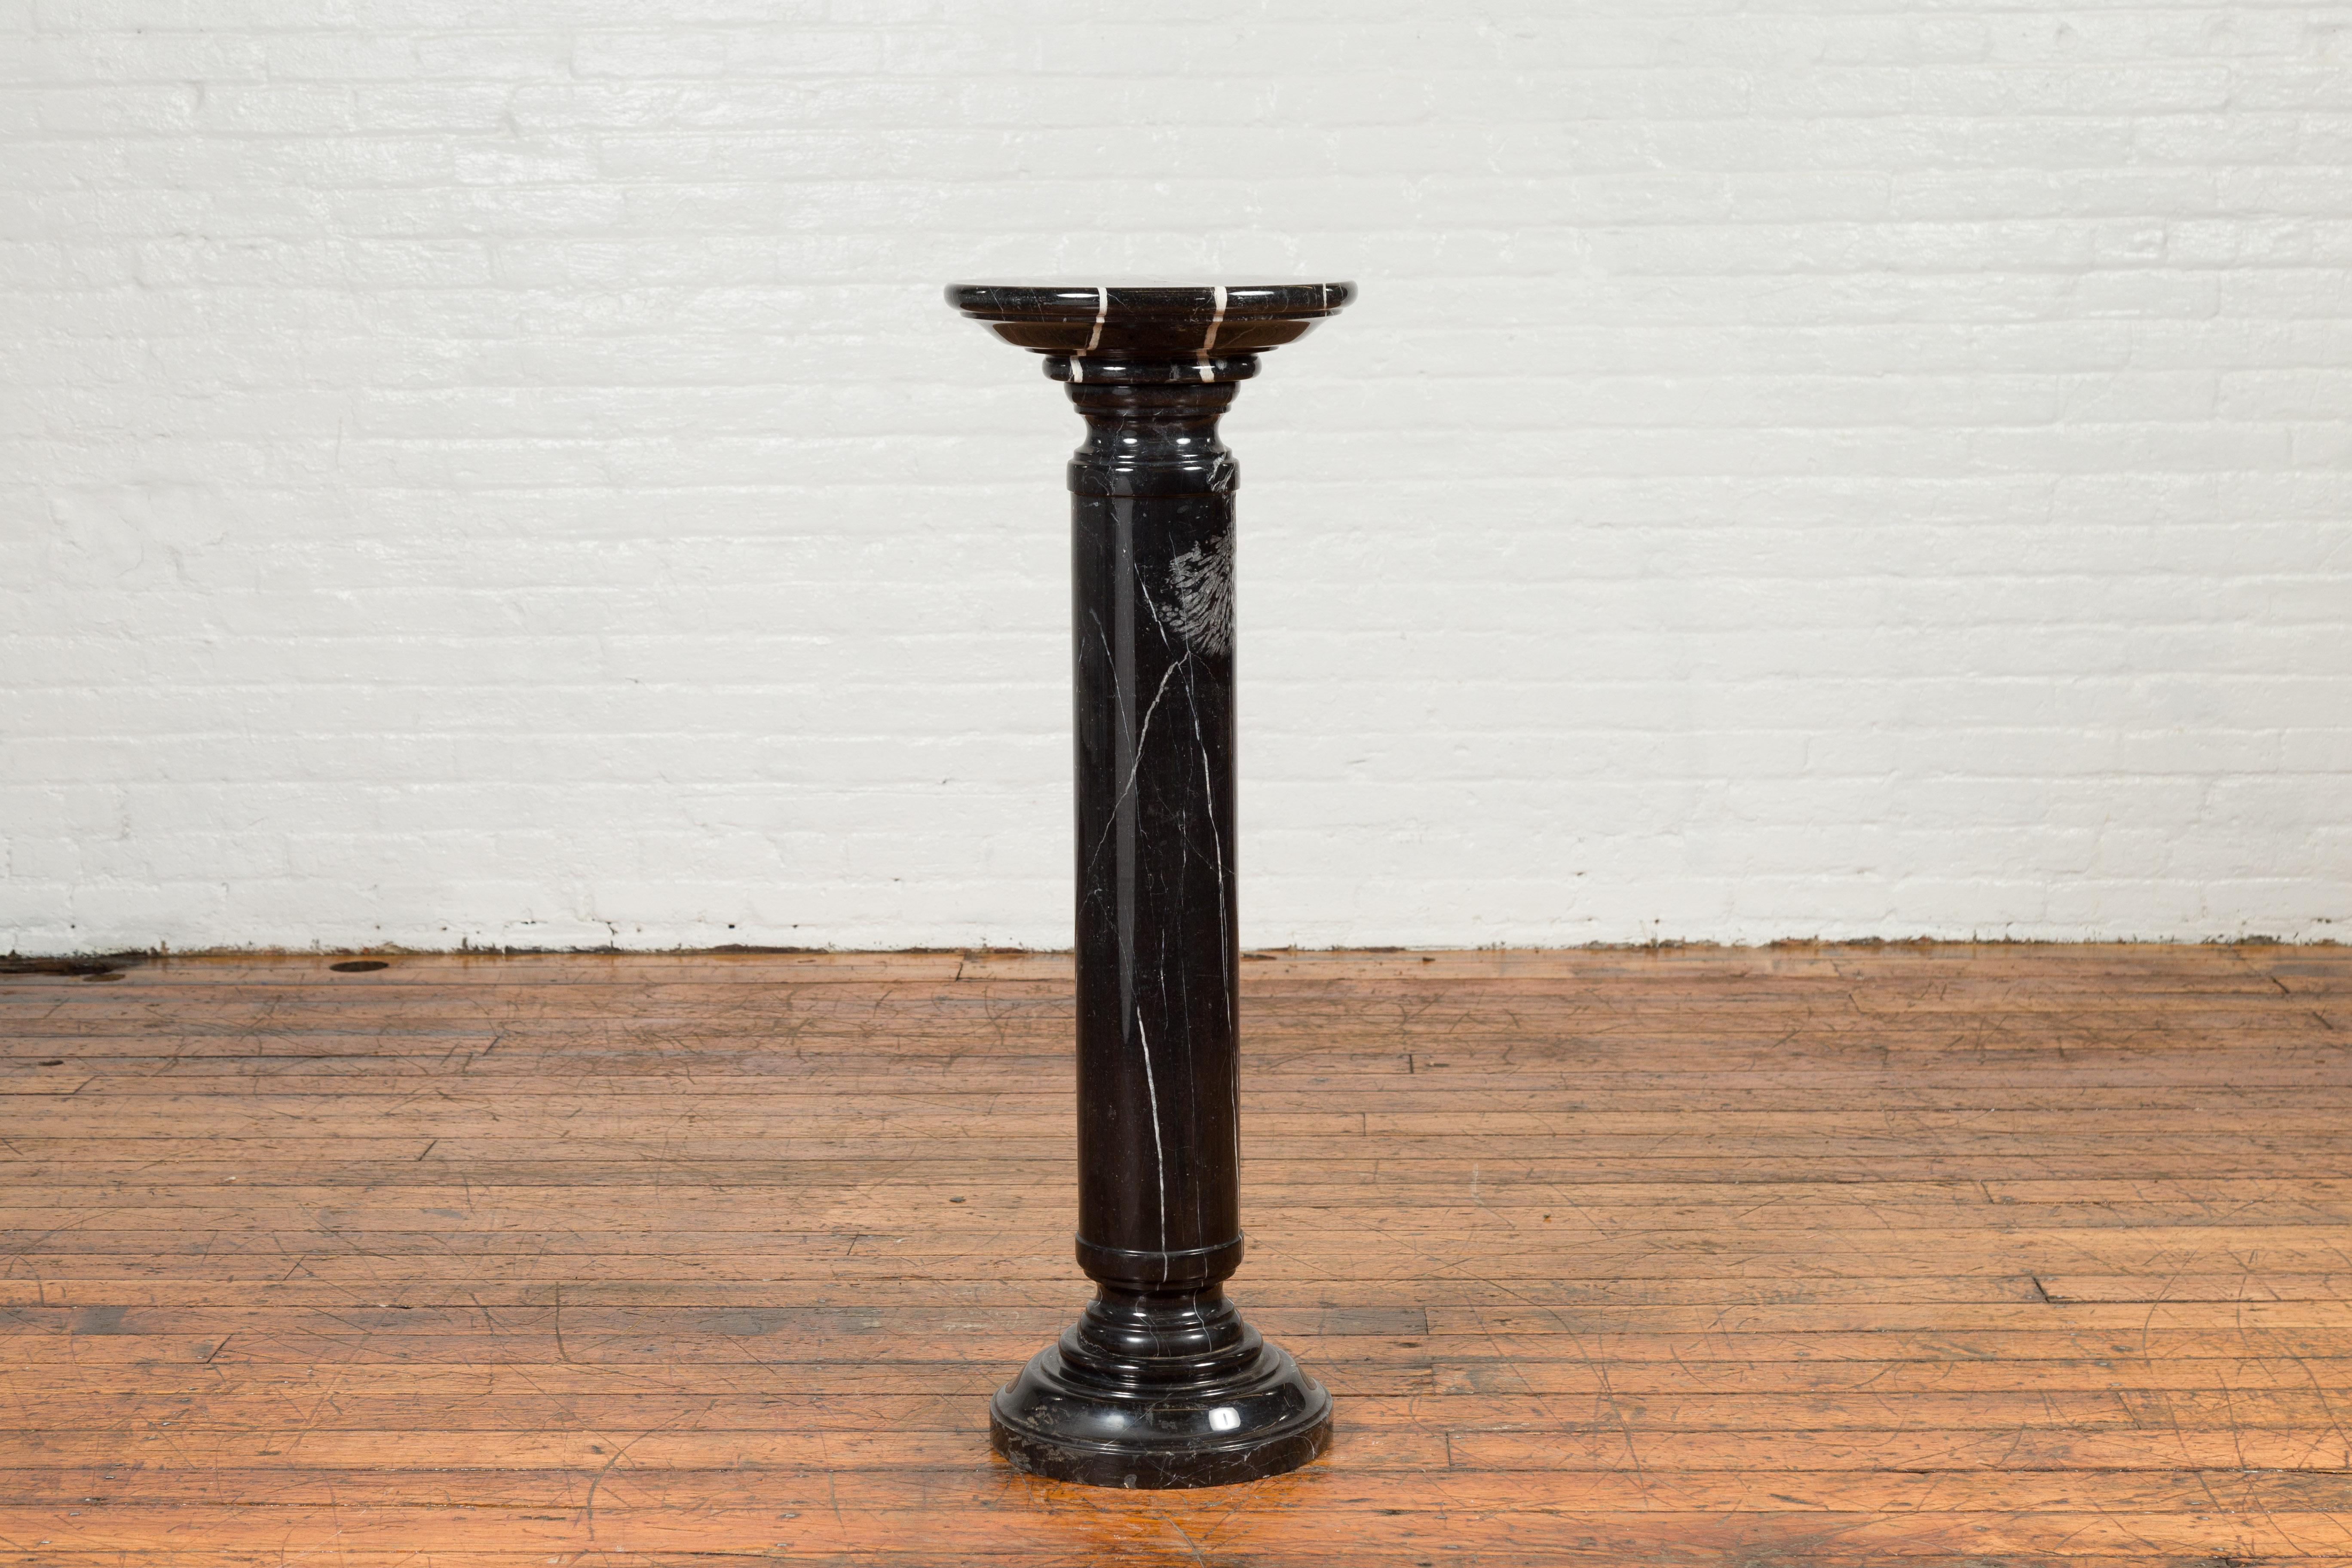 A Indian vintage black Carrara marble pedestal with circular top and cylindrical base. Crafted in India during the mid-20th century, this pedestal draws our attention with its black veined Carrara marble accented with white stripes and pure lines.